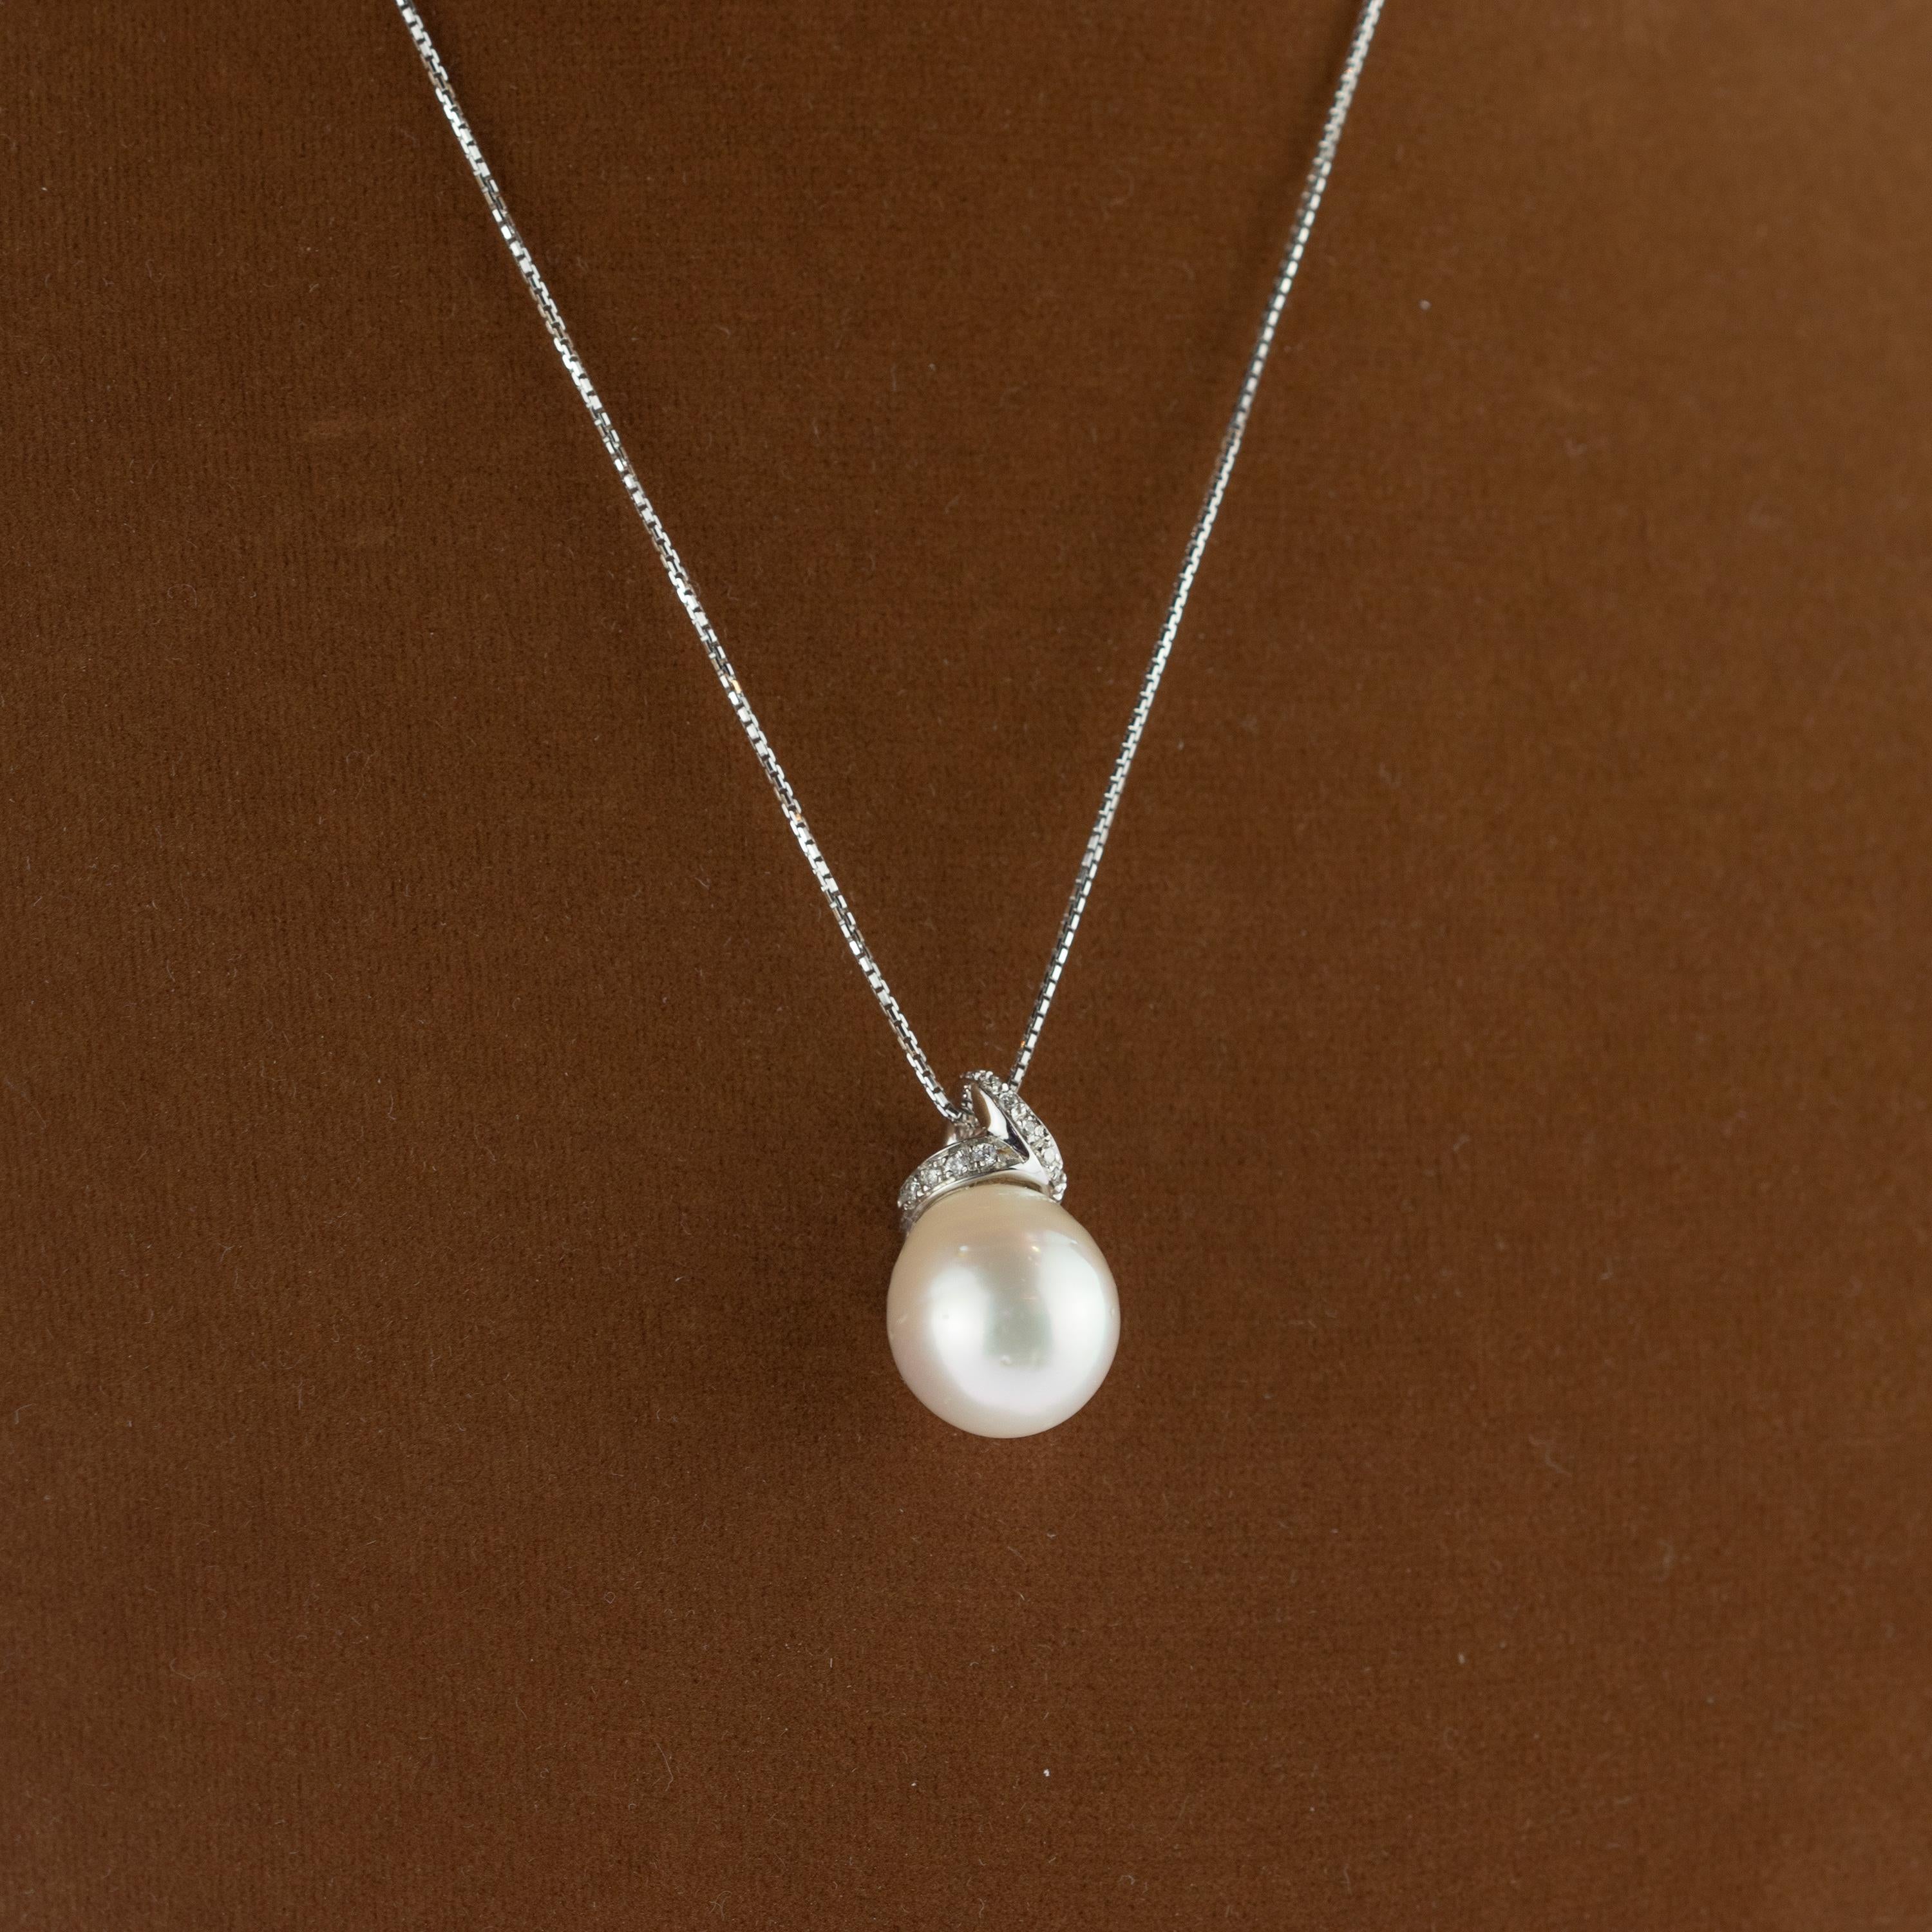 Women's or Men's Intini Jewels Pearl Diamond Pendant 18 Karat White Gold Crafted Chain Necklace For Sale